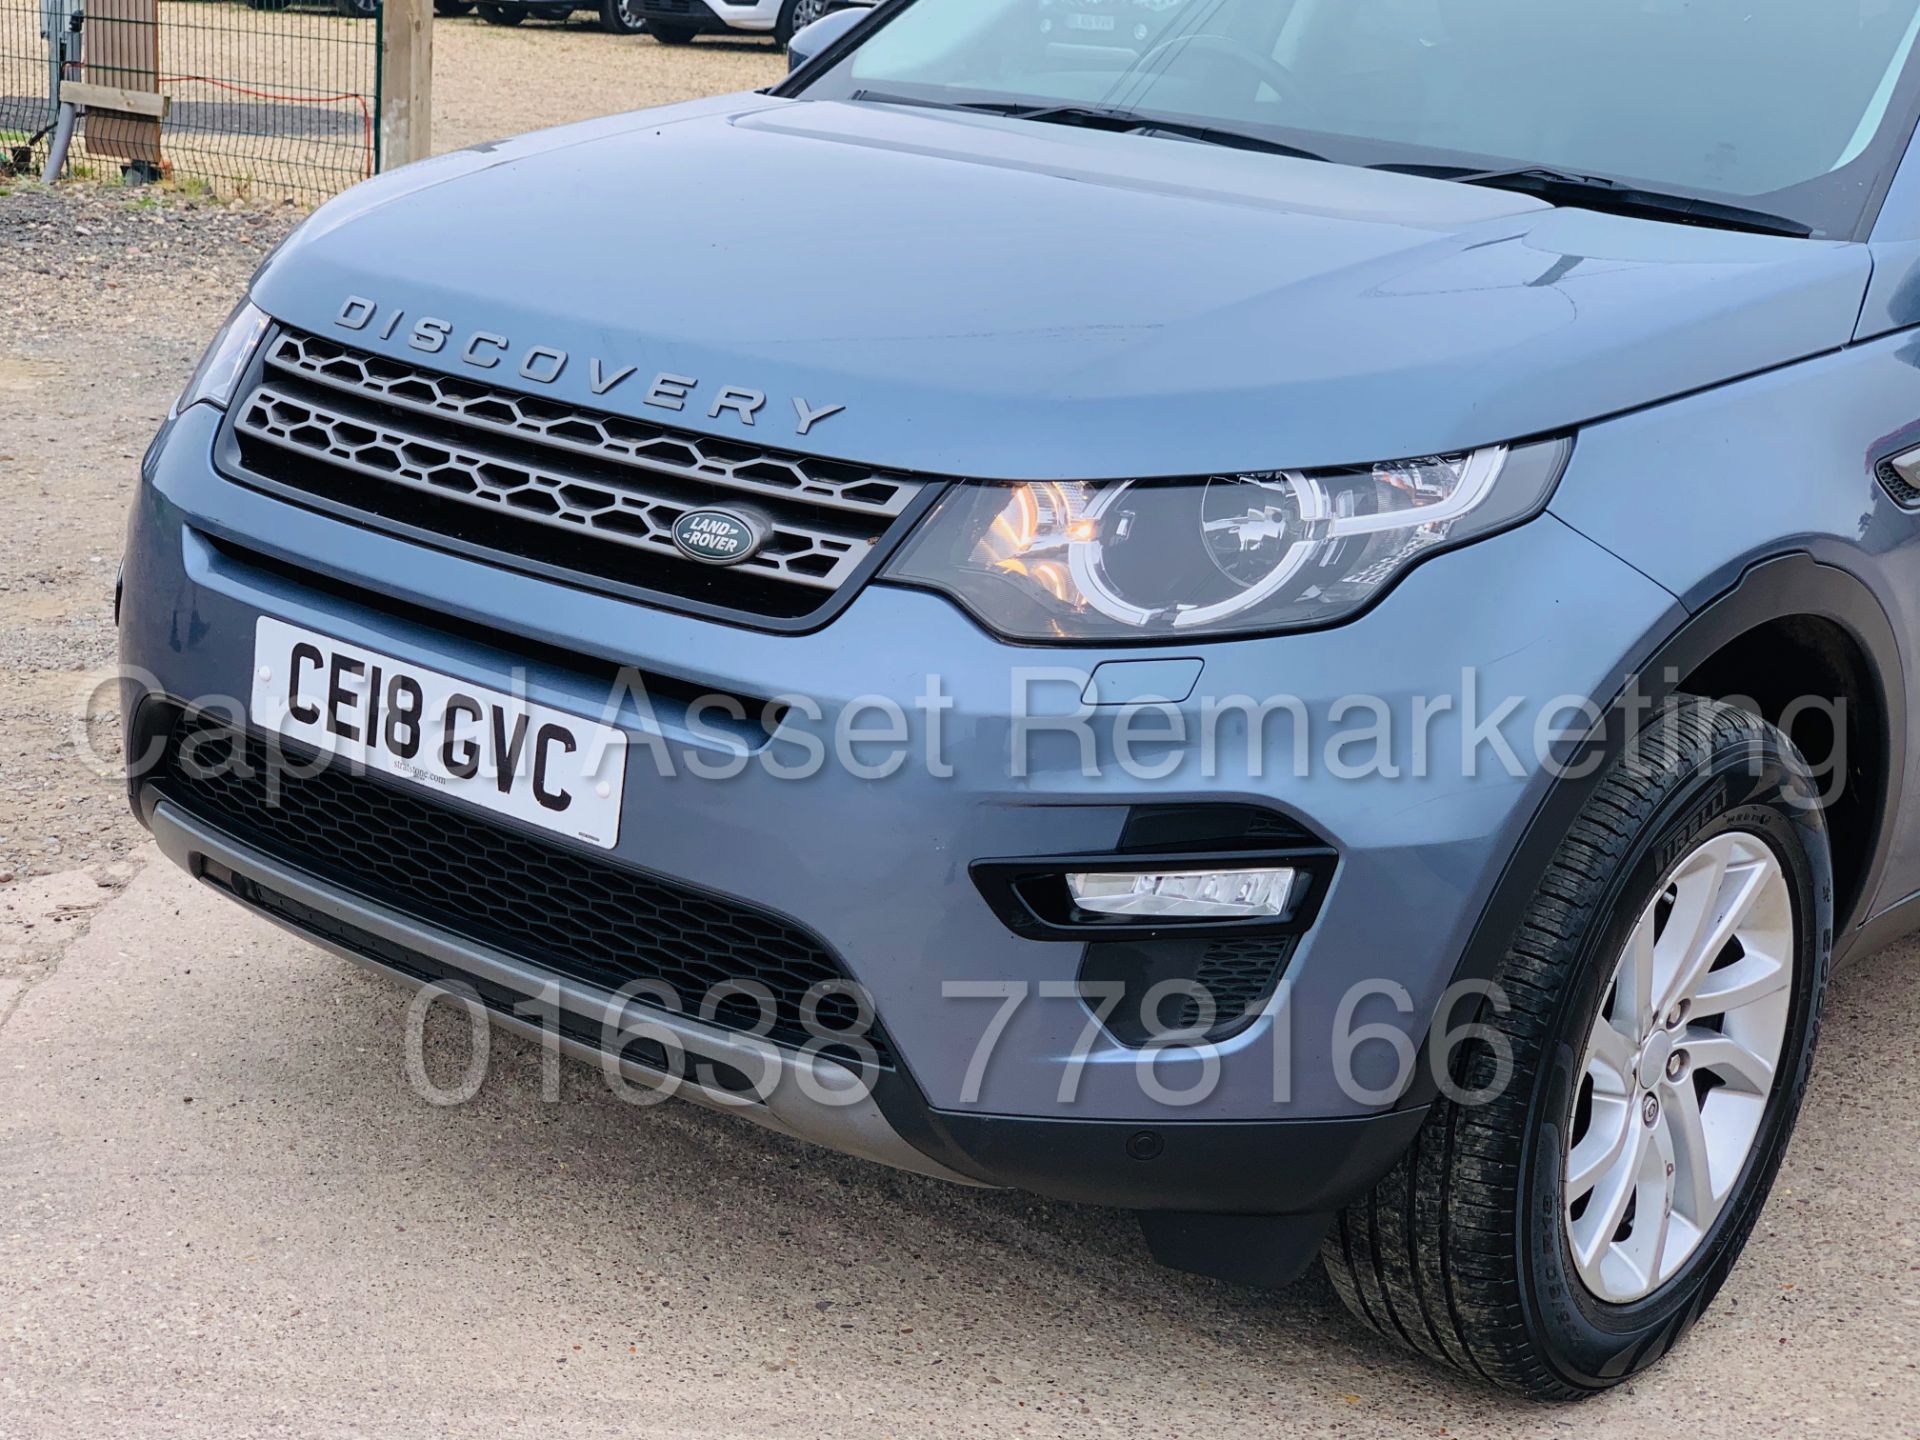 (On Sale) LAND ROVER DISCOVERY SPORT *SE TECH* 7 SEATER SUV (2018) '2.0 TD4 - STOP/START' *SAT NAV* - Image 16 of 59